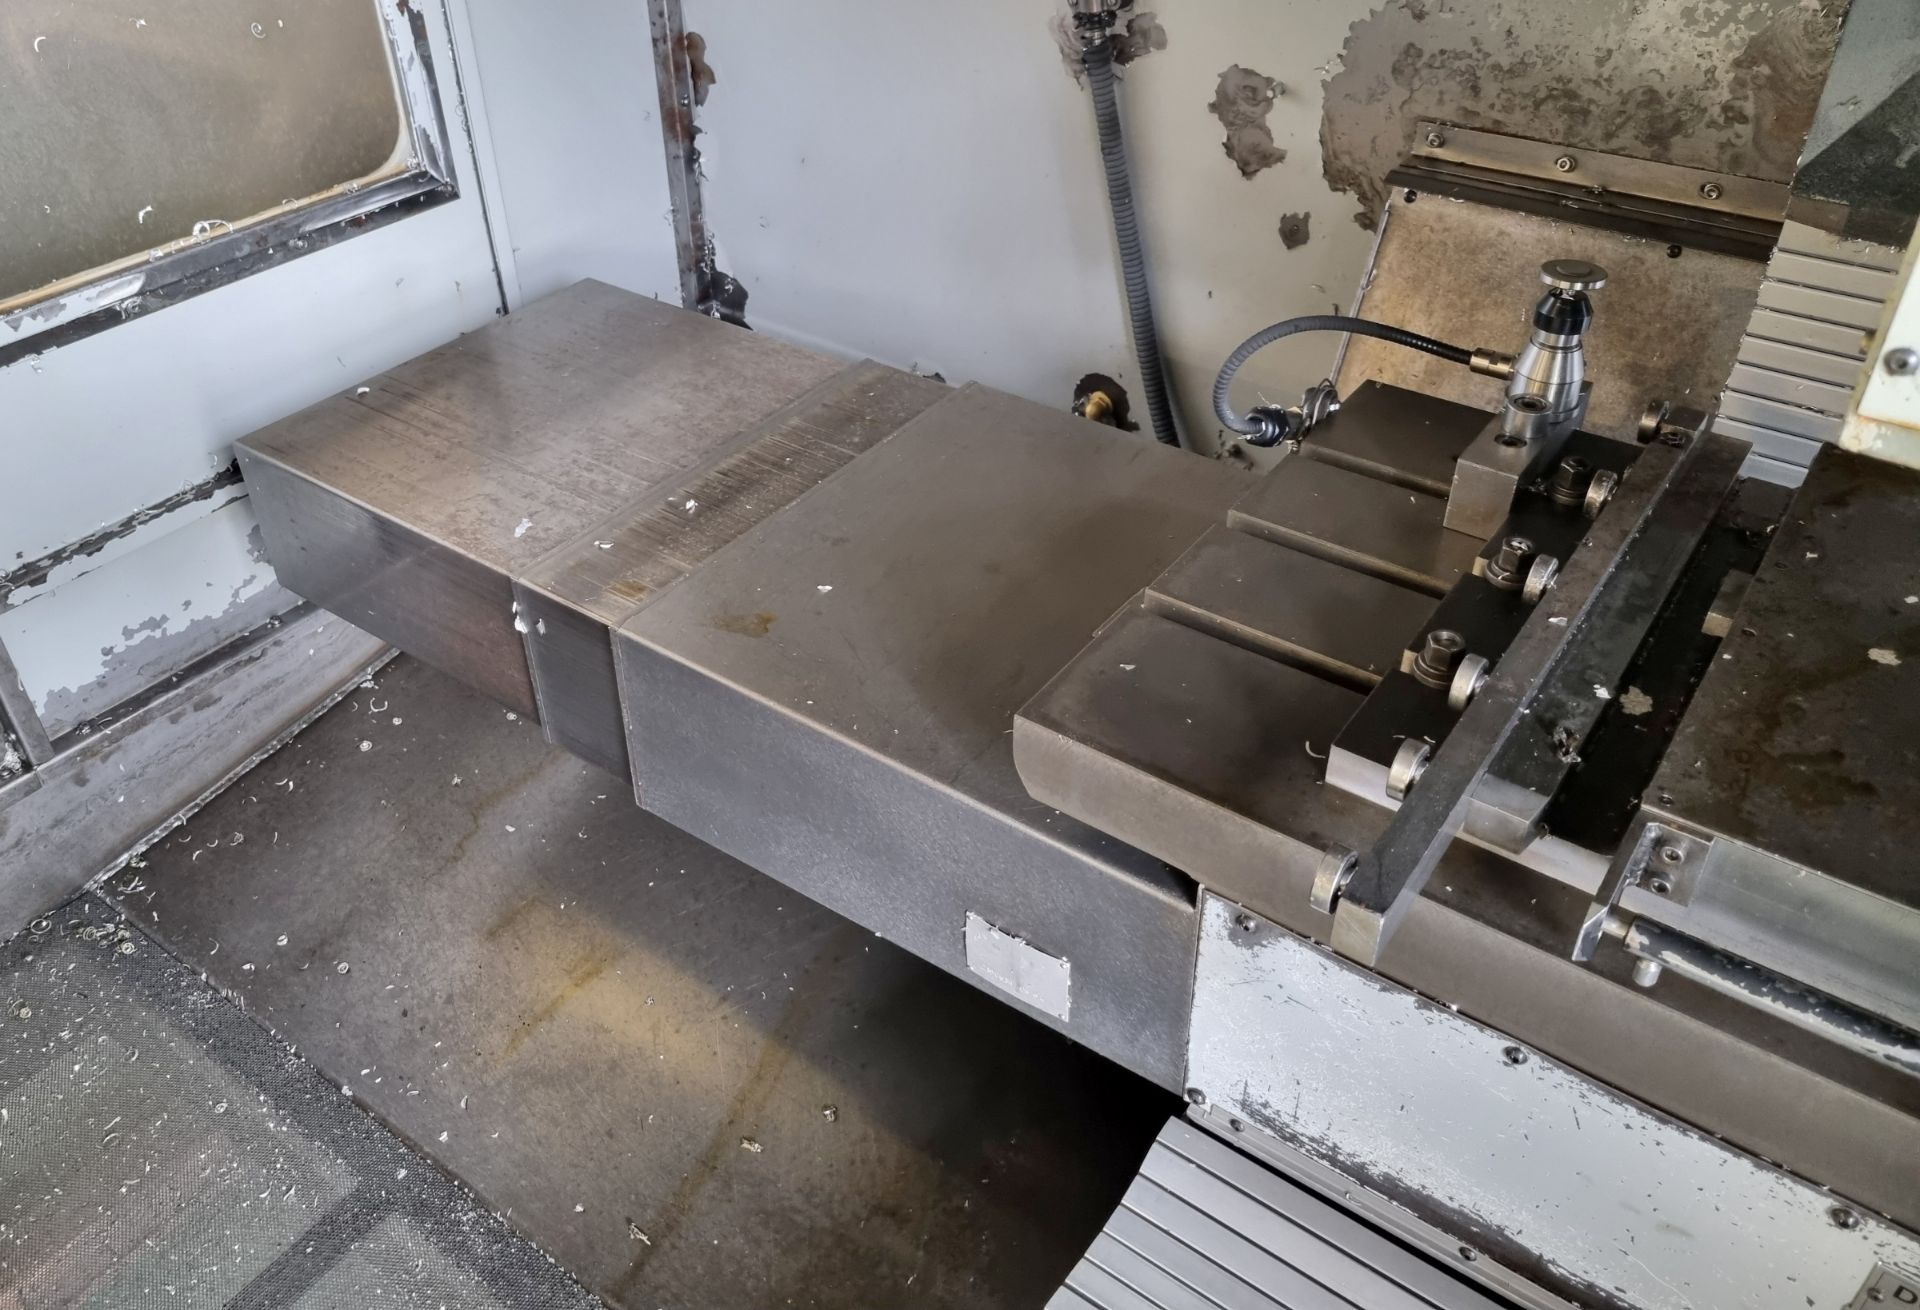 Bridgeport VMC 760 CNC vertical machining centre with work bench and swarf skip - Serial No: 20363 - Image 17 of 27